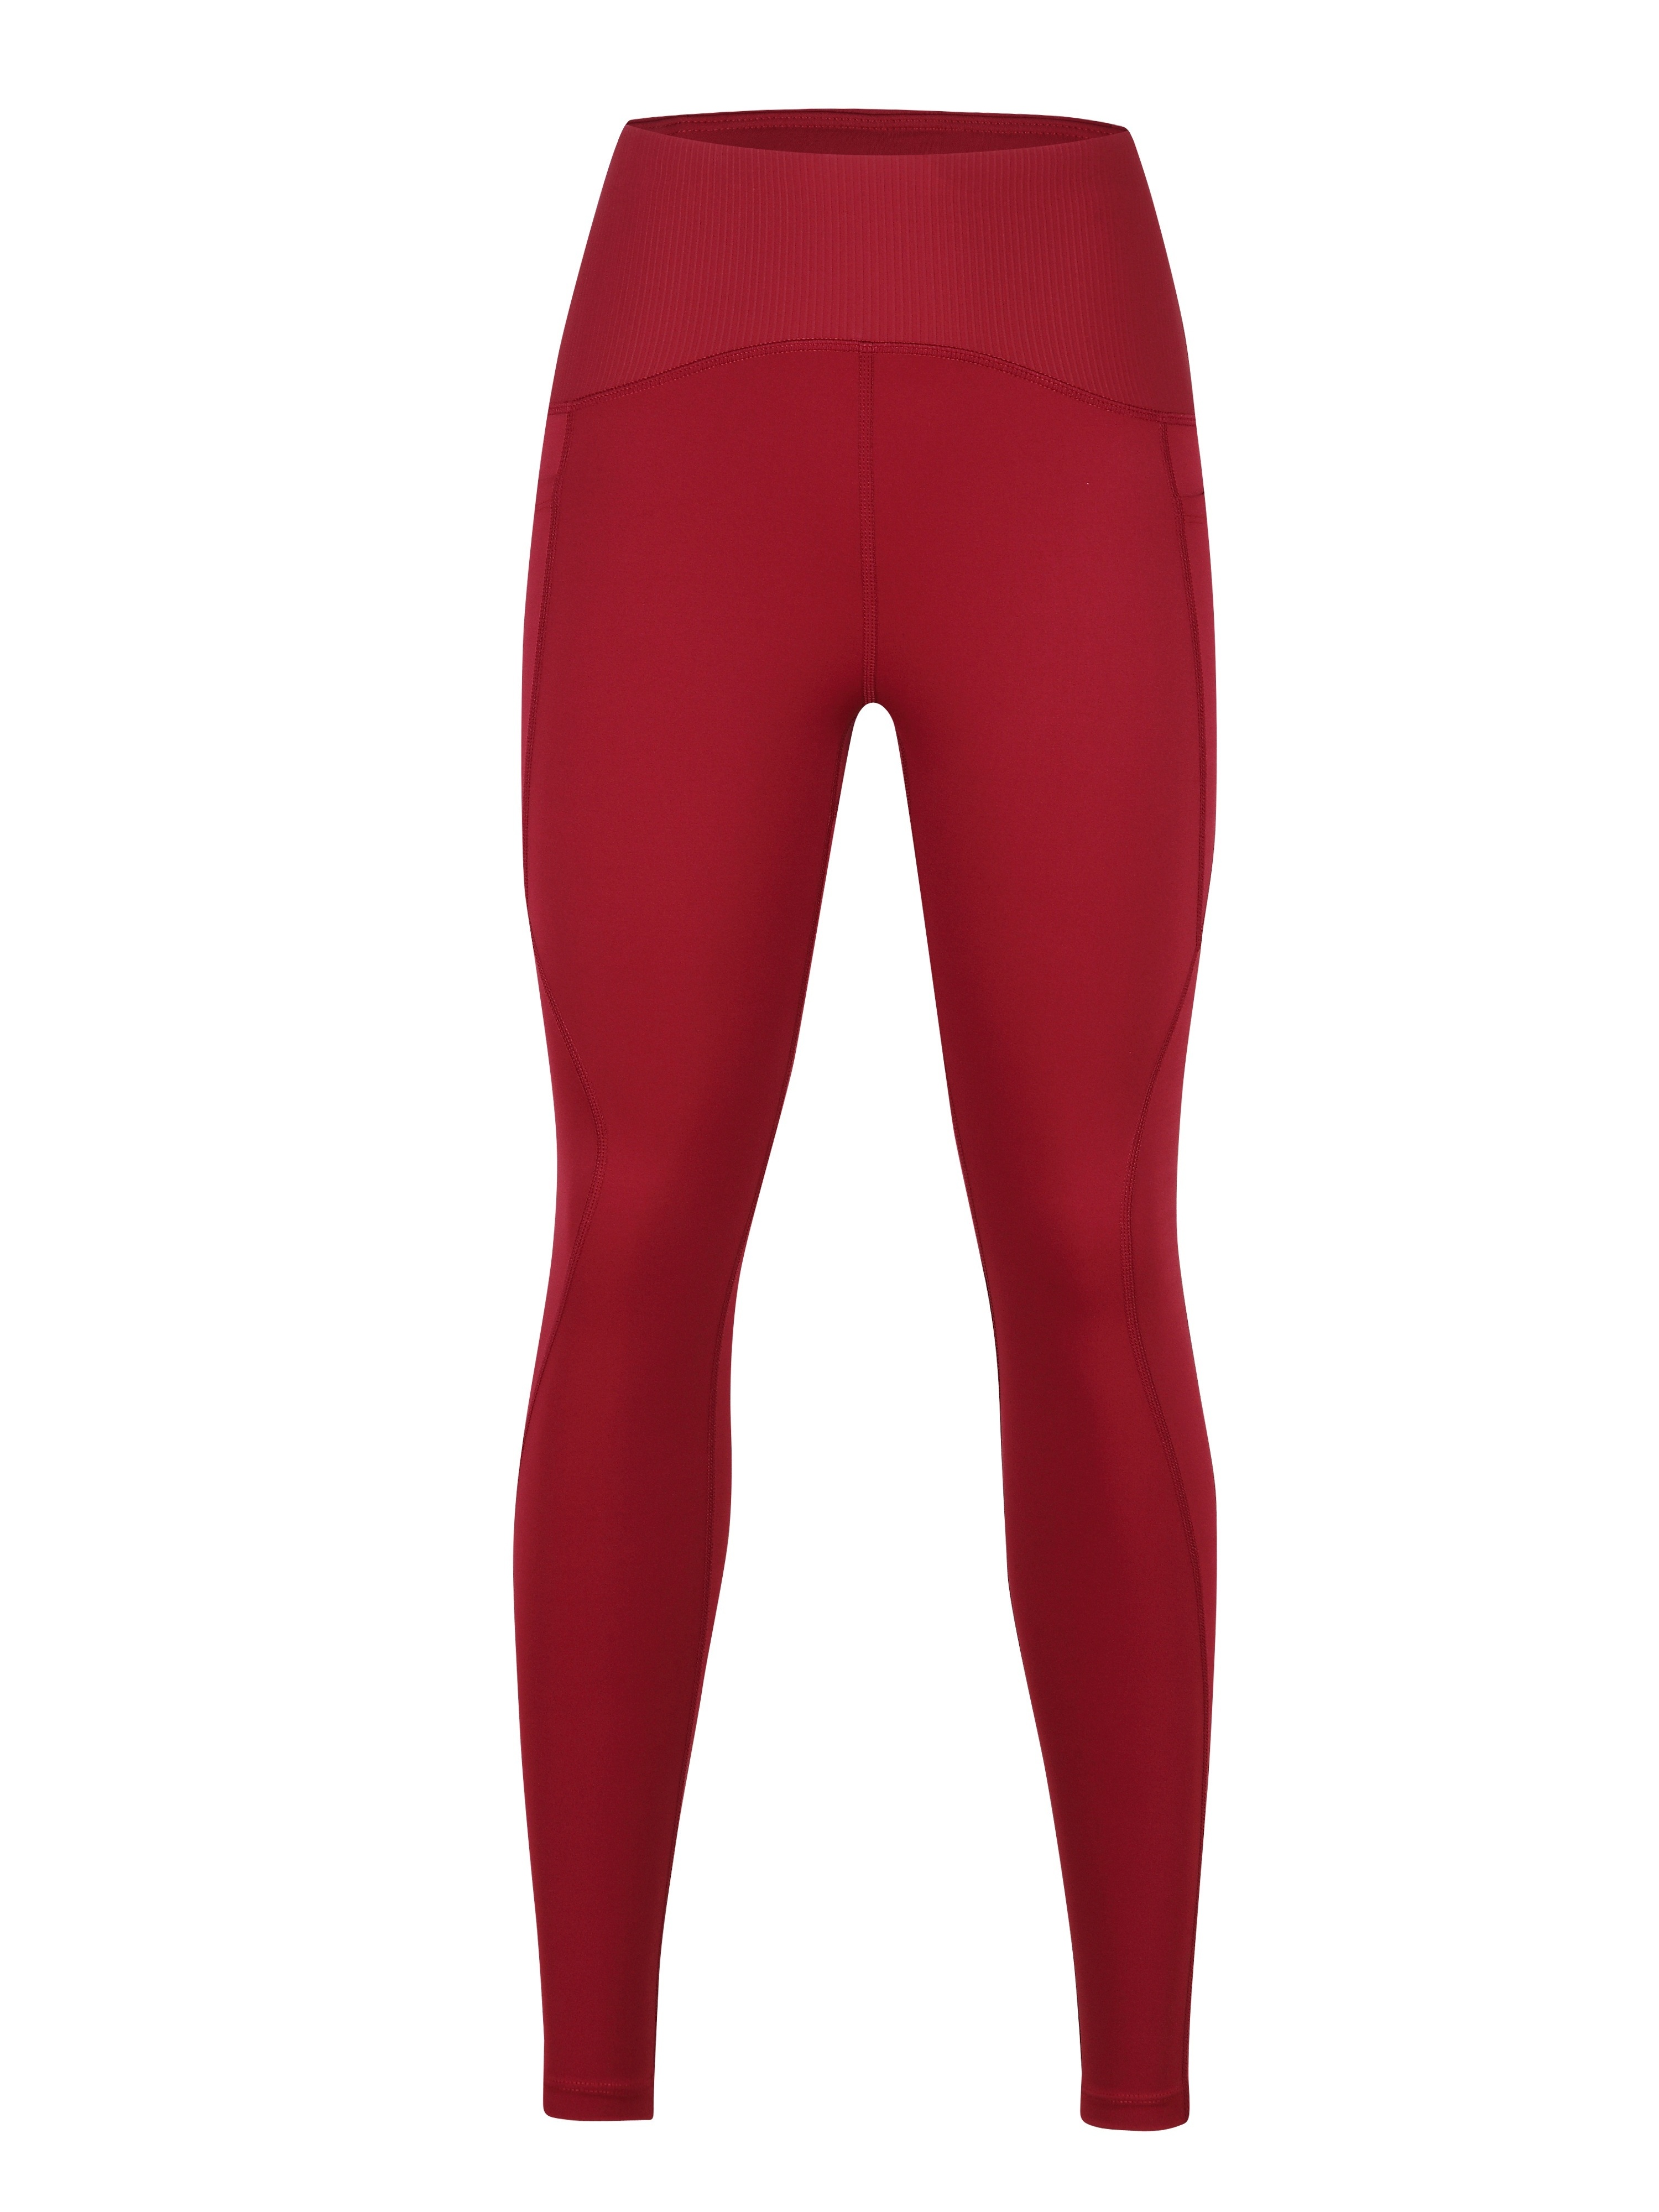 TUNGLUNG High Waist Yoga Pants, Yoga Pants with Pockets Tummy Control  Workout Pants 4 Way Stretch Pocket Leggings Wine Red at  Women's  Clothing store